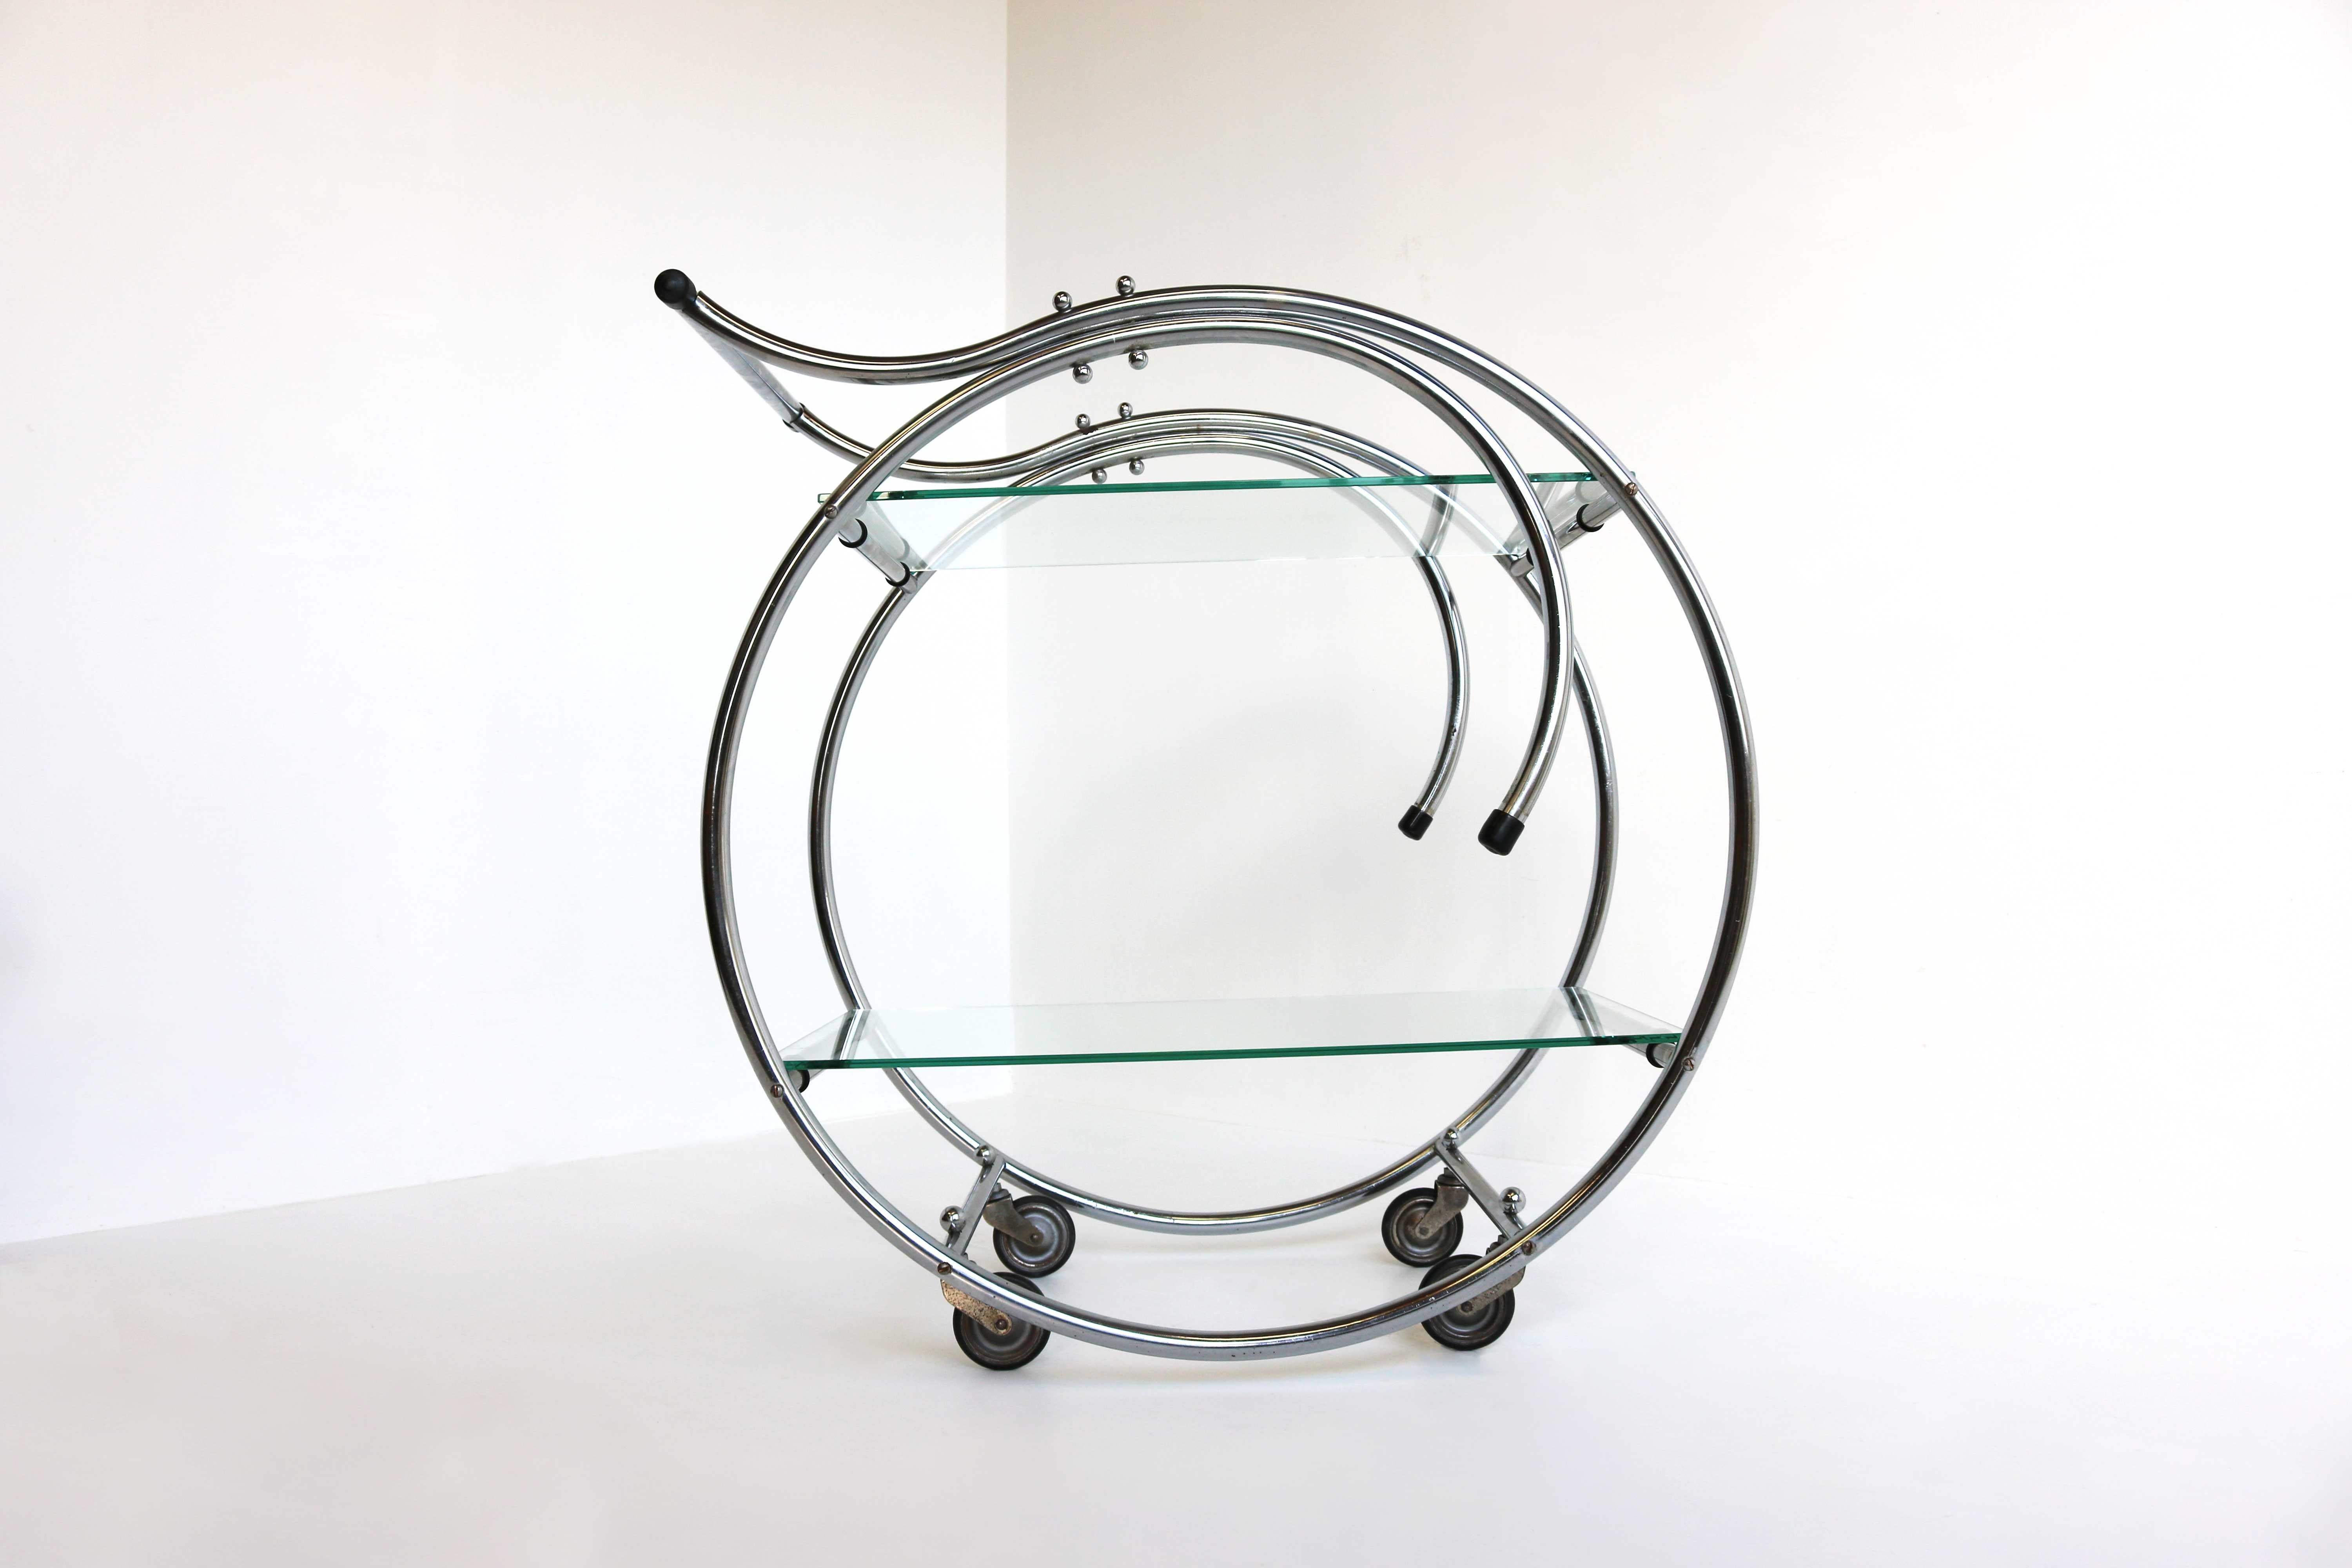 Circular Shape Authentic Art Deco Bauhaus bar cart in chrome & glass from the 1930s. 
Gorgeous Art Deco design with timeless chrome bends & two tiers of glass. Marvelous antique piece that will make a lasting impression. Will fit in almost any